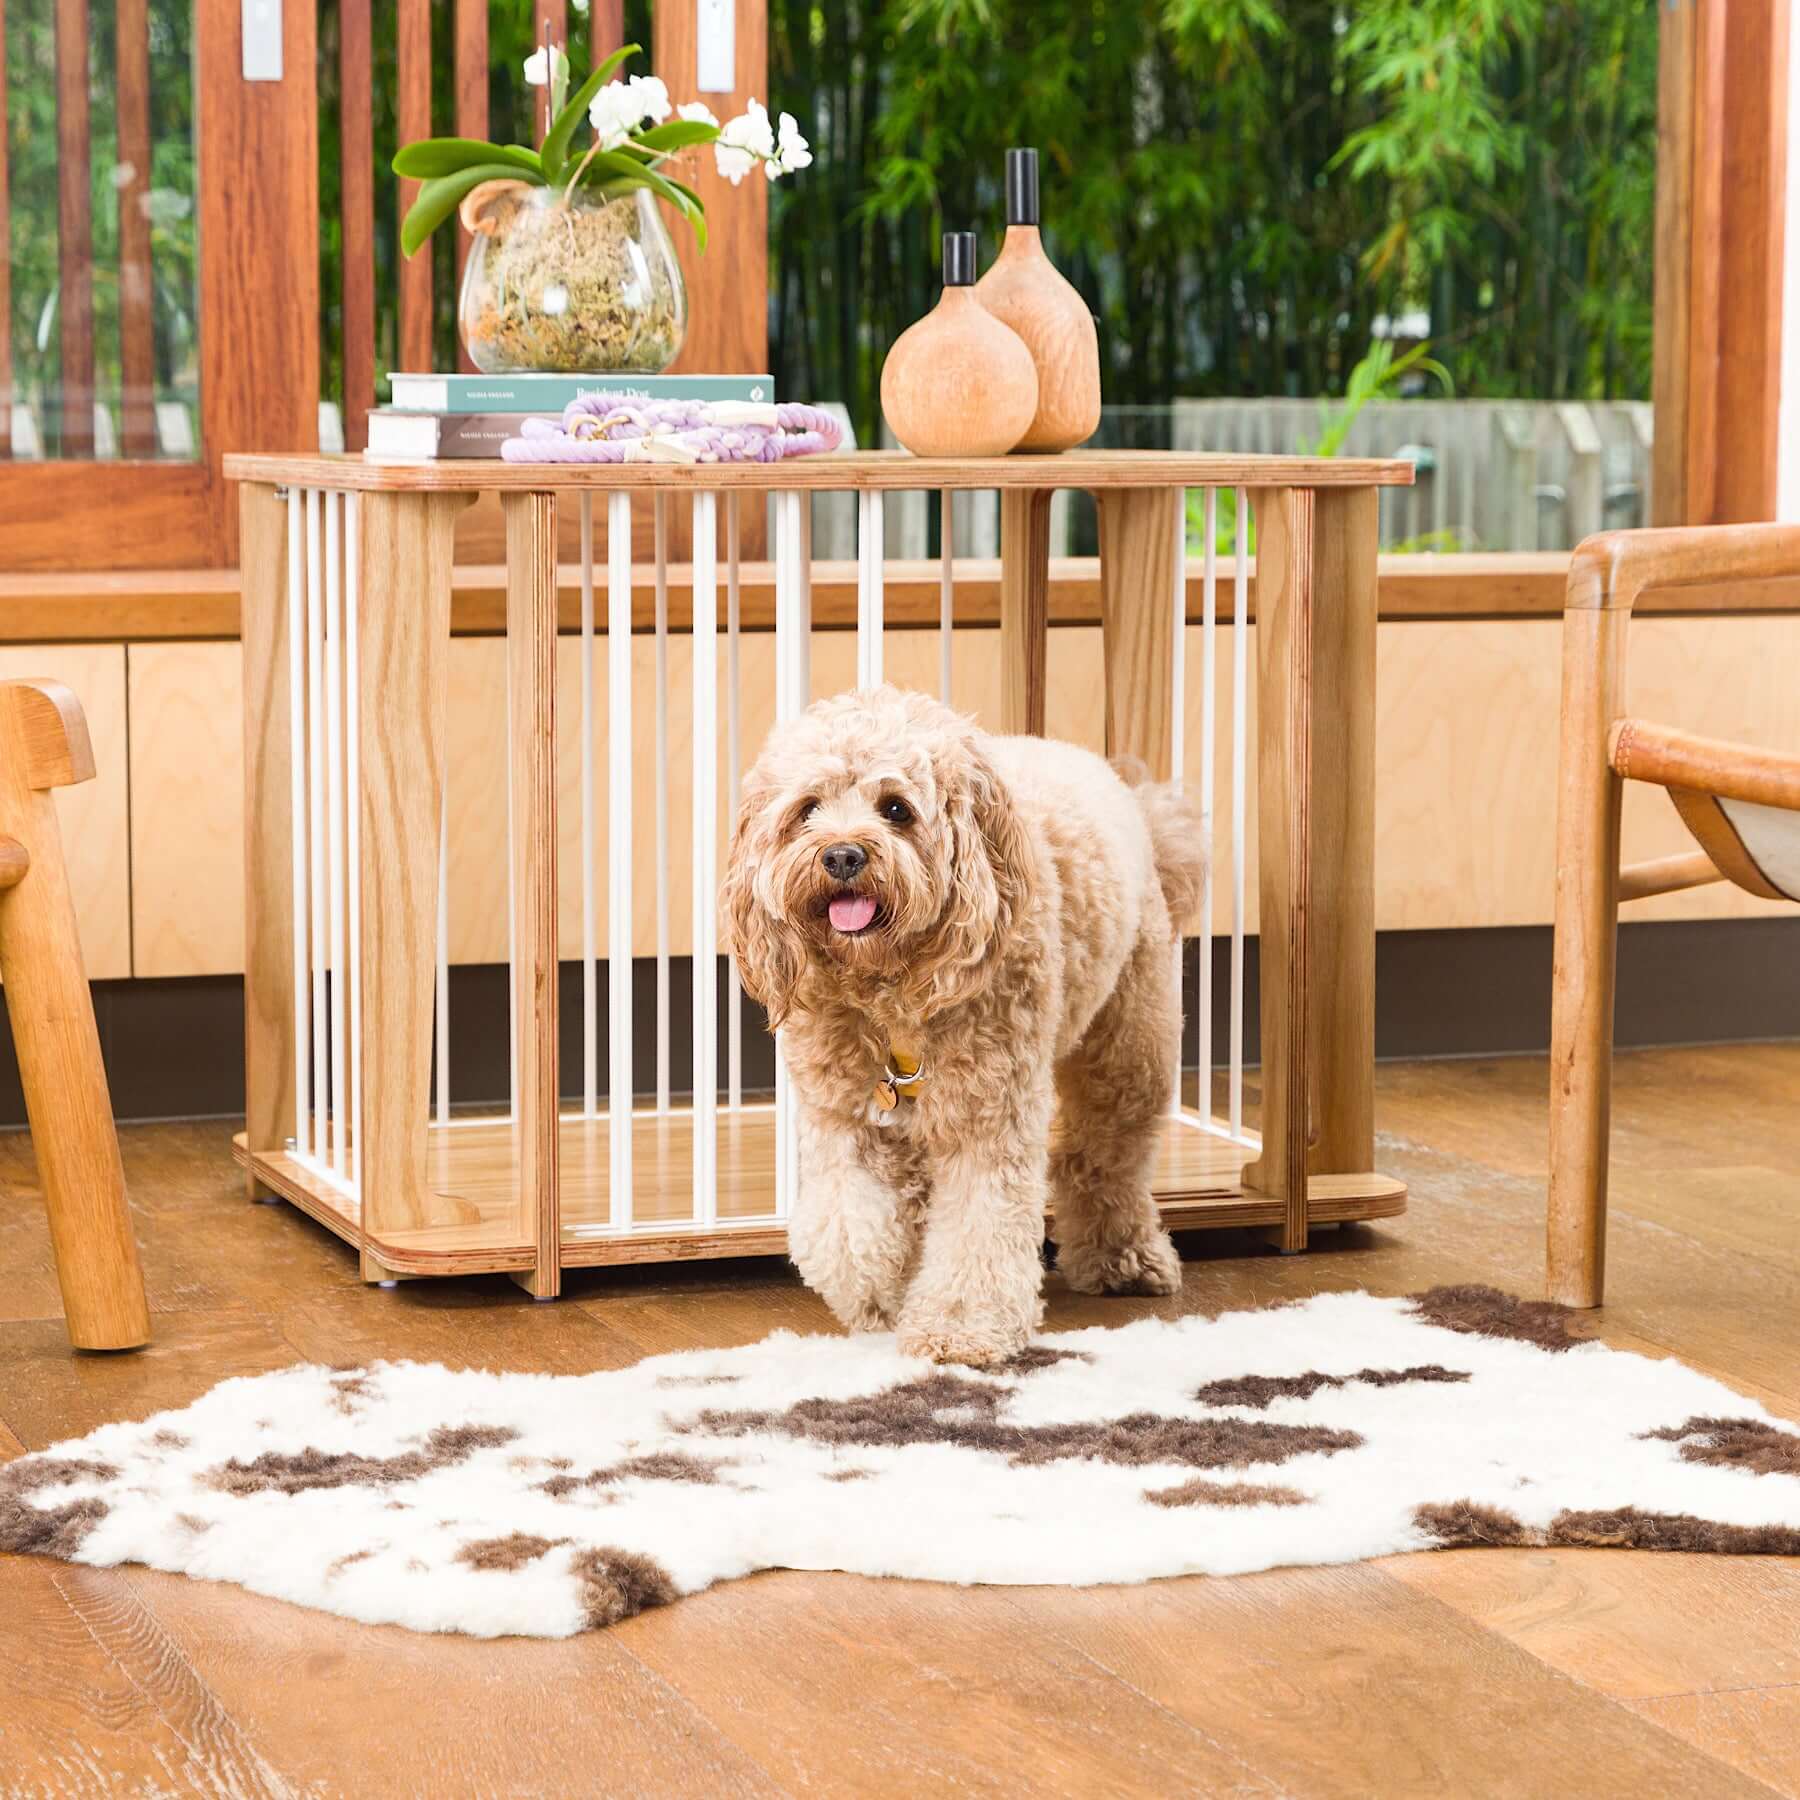 A pet dog standing beside Archie the Luxury Dog Crate in a home setting